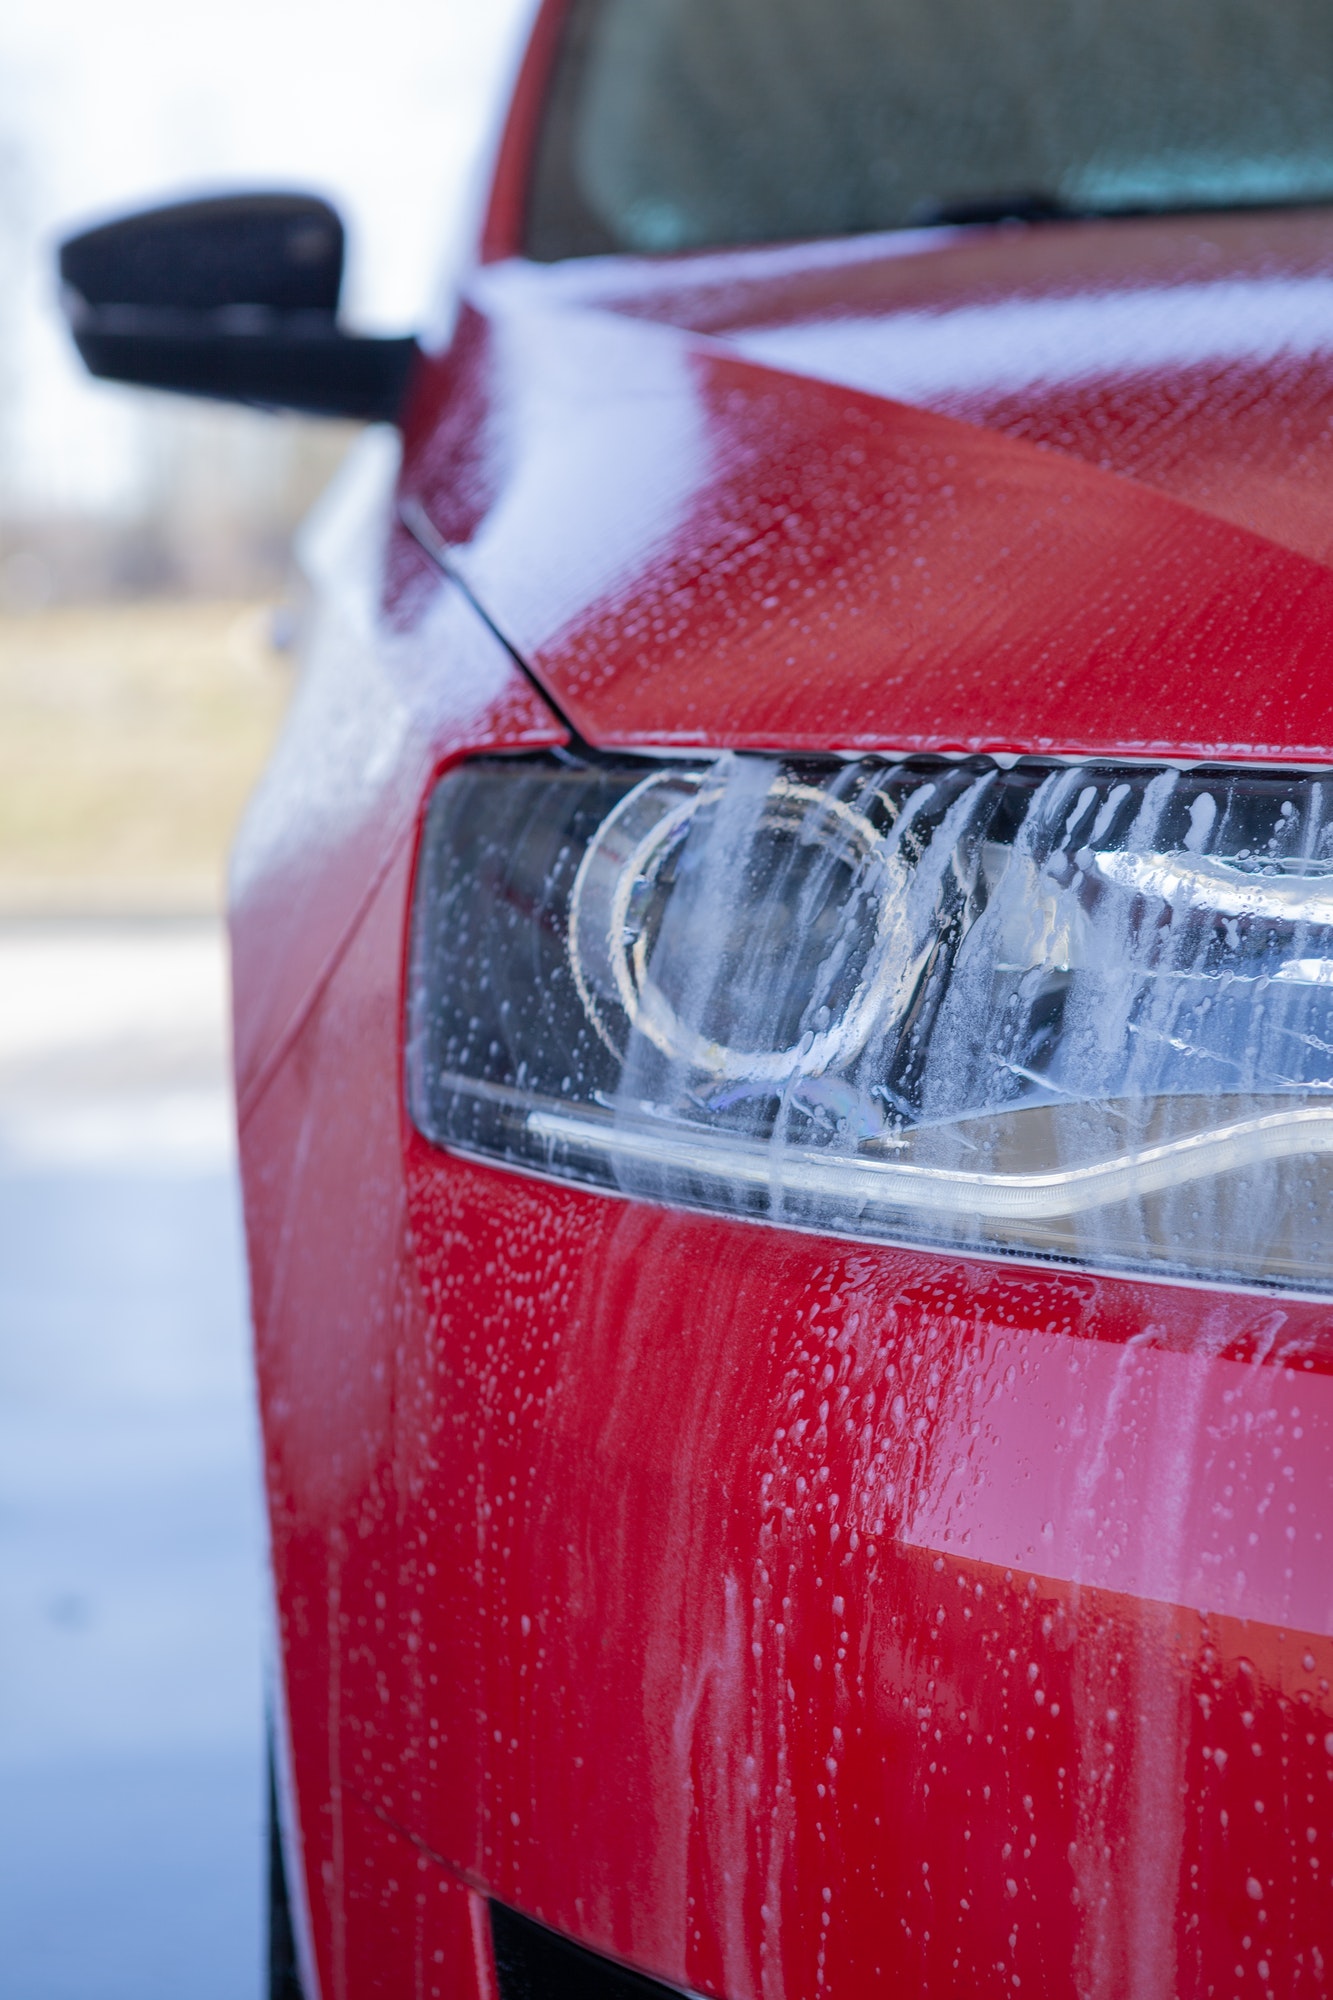 Car wash close-up. Washing a modern car with high-pressure water and soap, cleaning the headlights